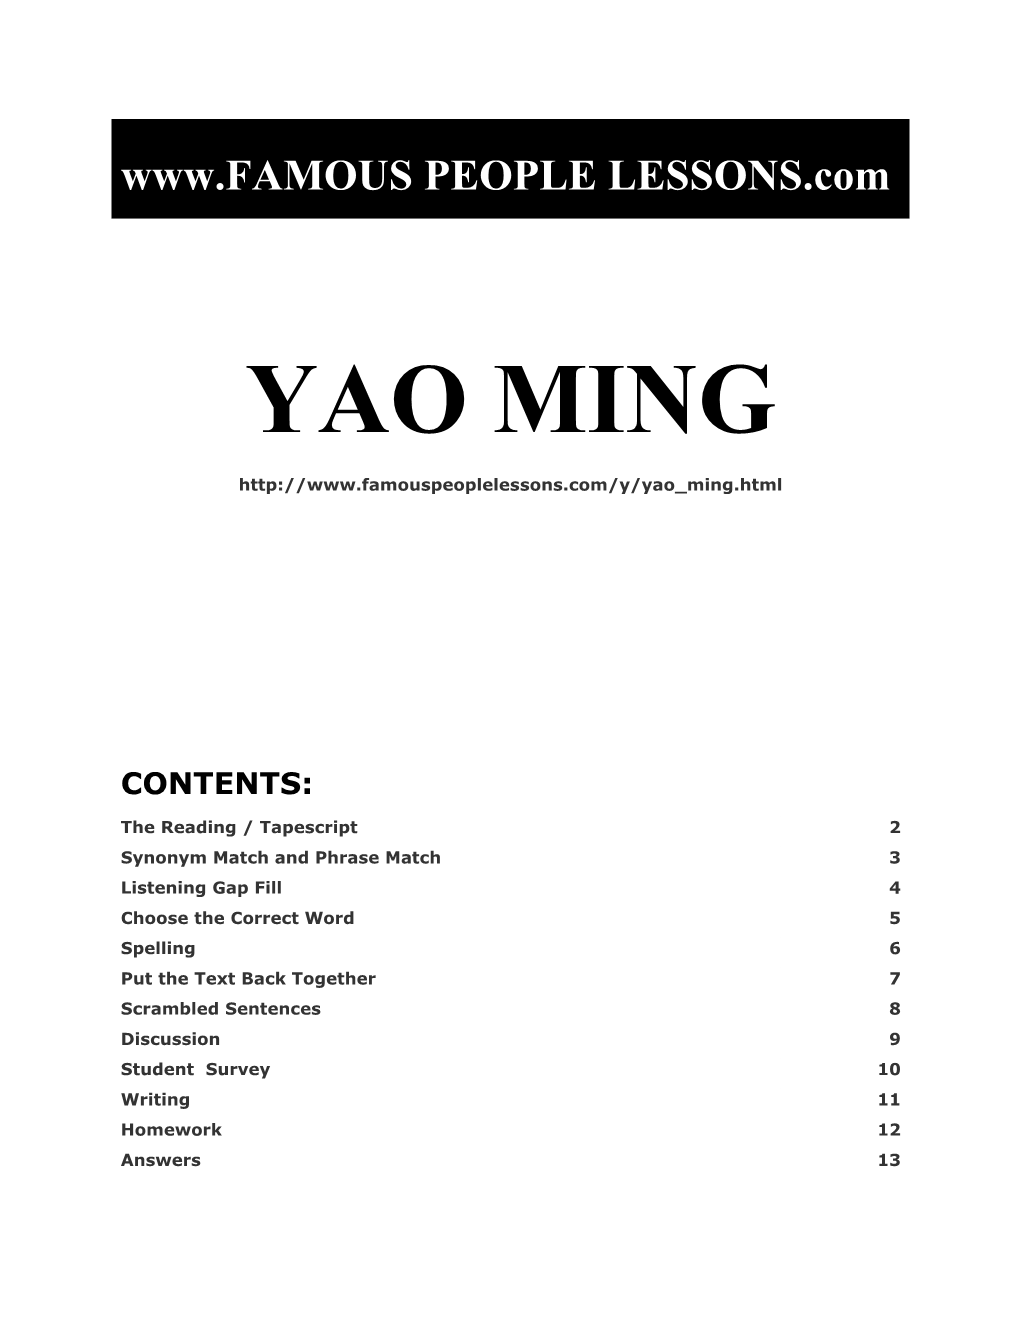 Famous People Lessons - Yao Ming